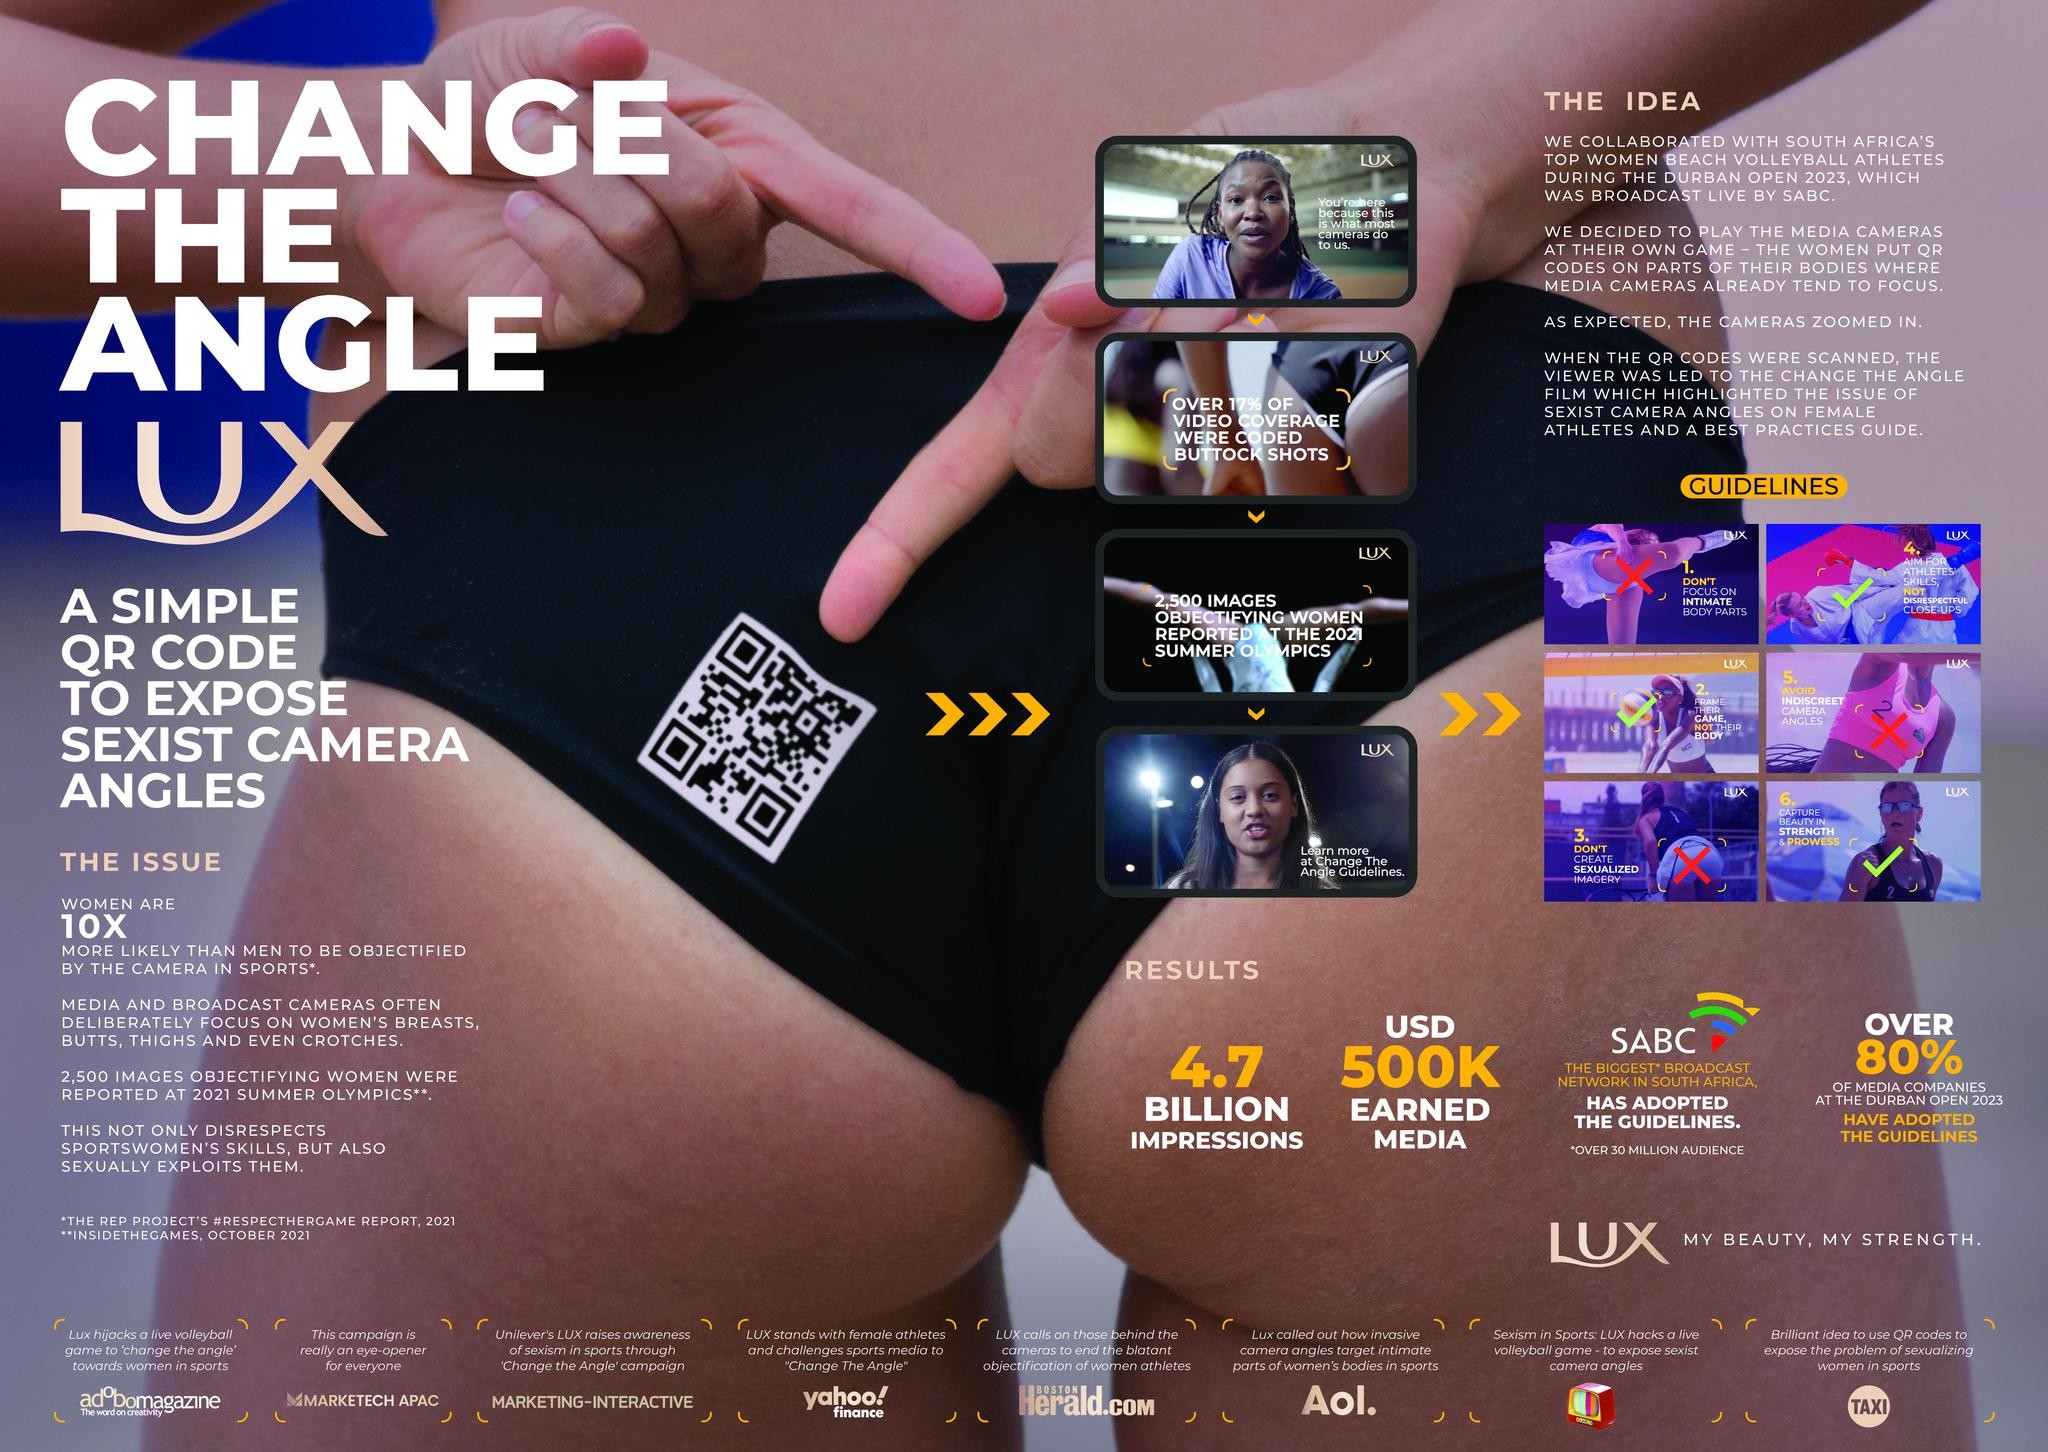 Women must wear bikini bottoms'; the paradigm shift needed to 'change the  angle' towards female athletes, Advertising